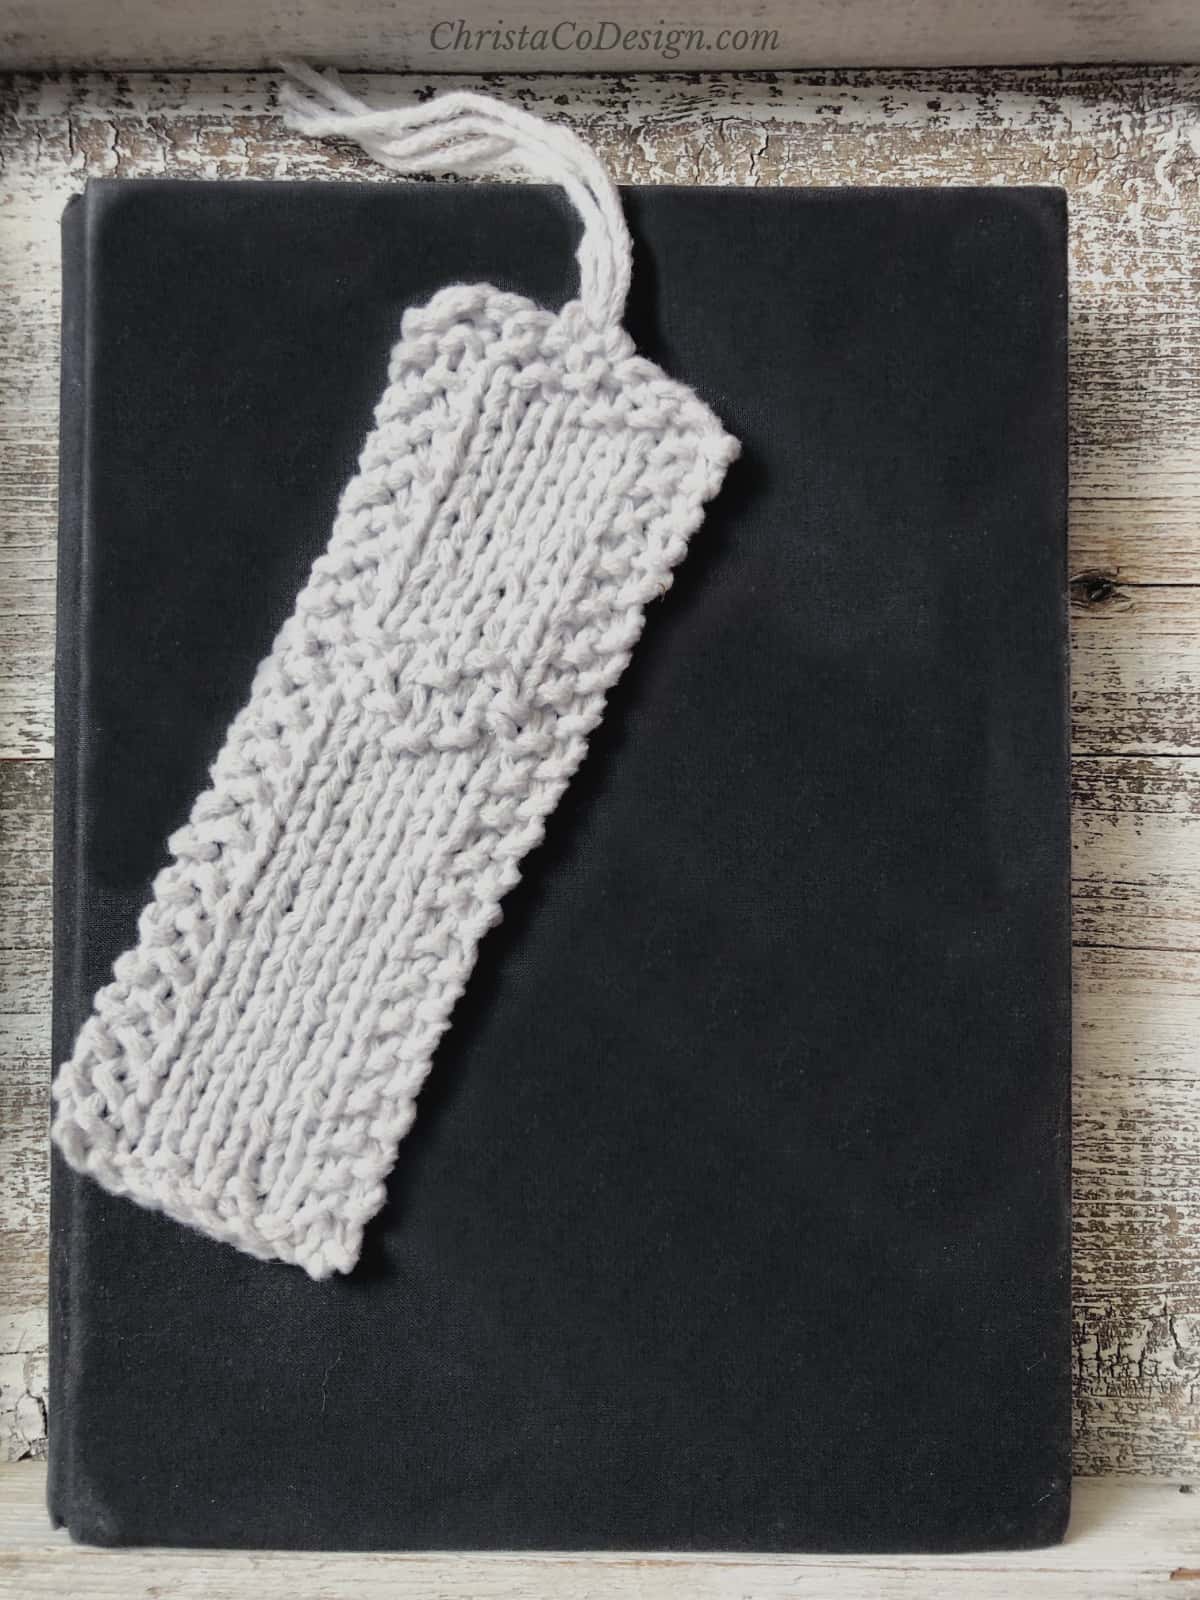 White knitted bookmark with fringe and heart detail on black book.